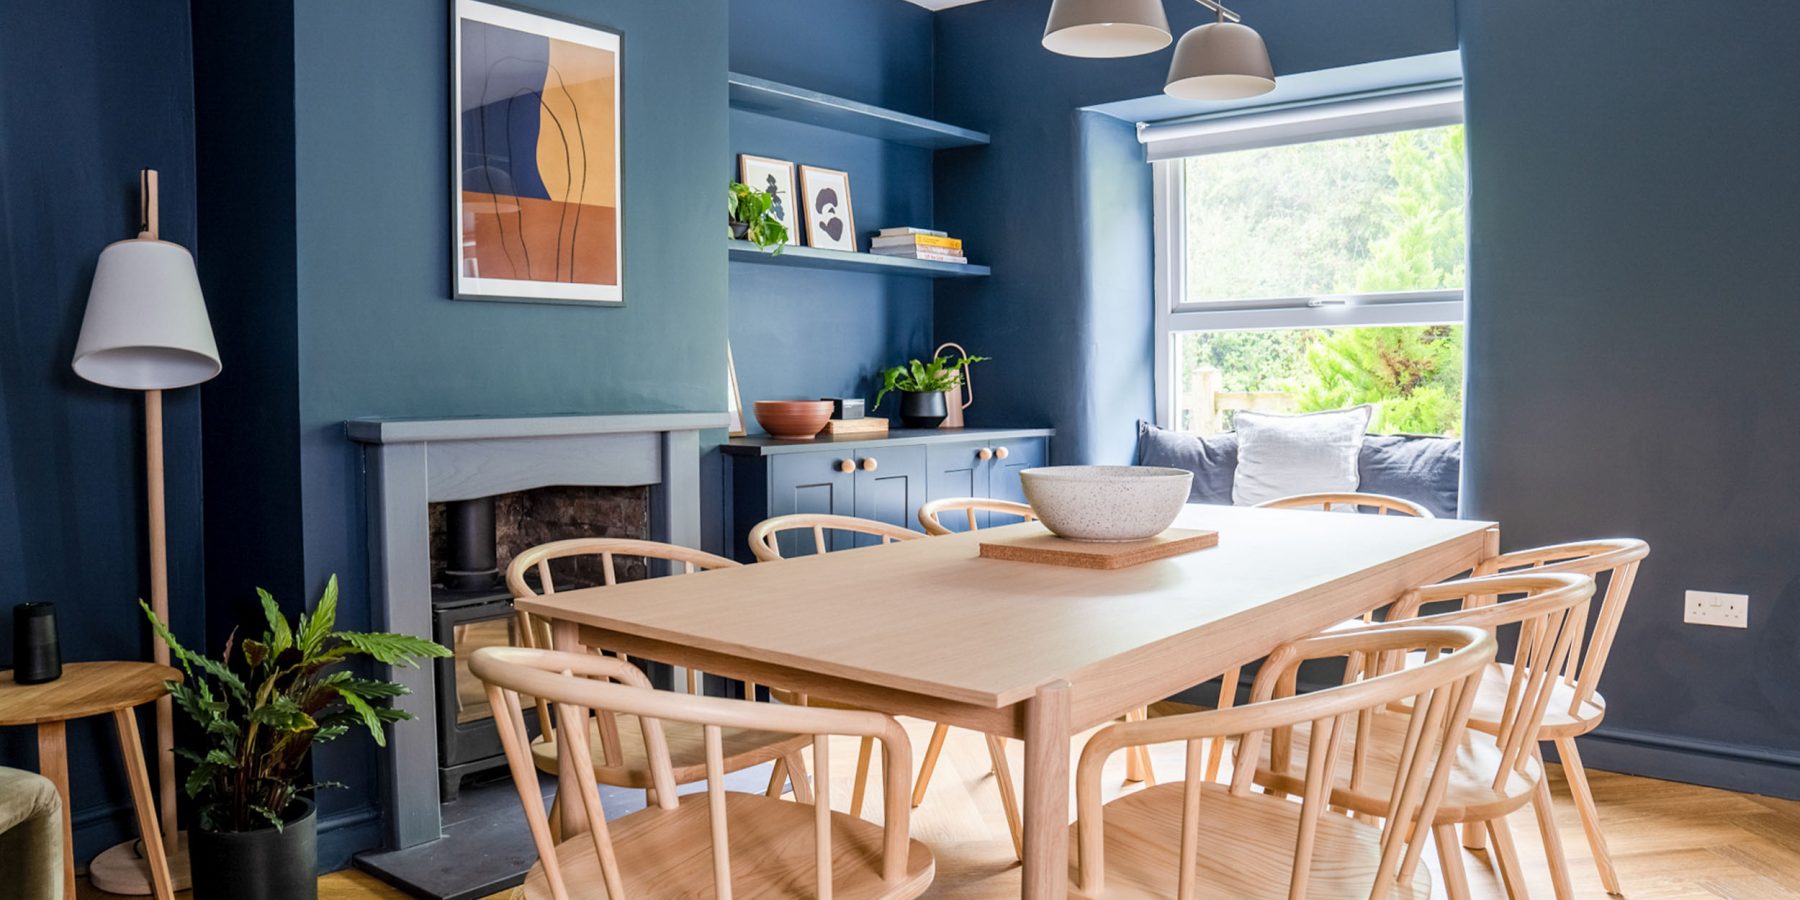 Dining table, window, blue walls, natural light, decor, plant, painting, wooden floorboard, spacious